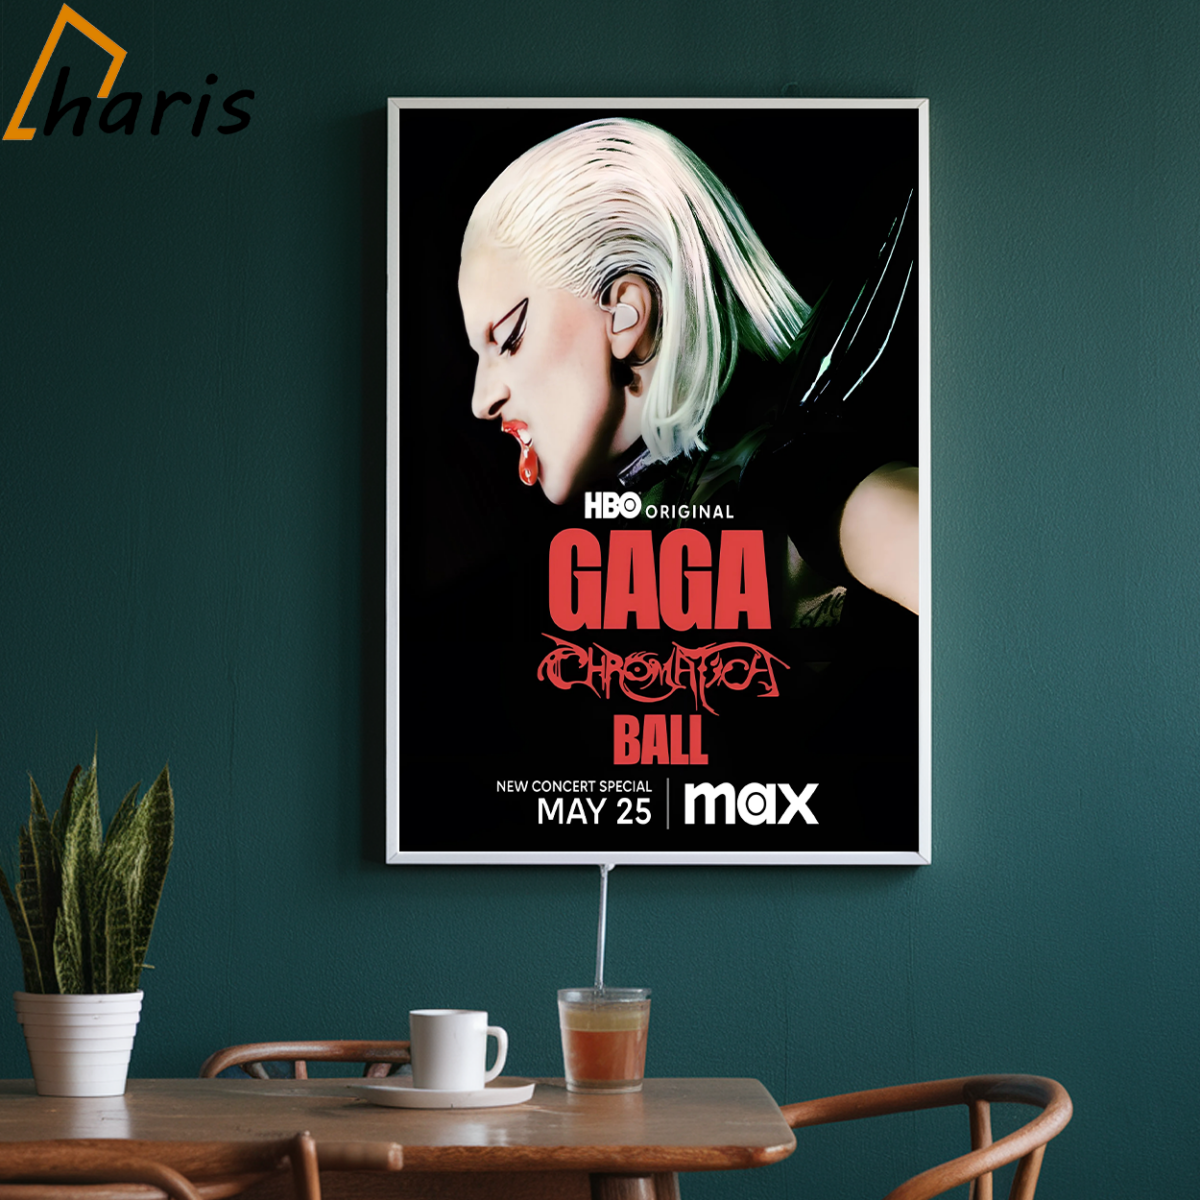 Lady Gagas GAGA CHROMATIC BALL Concert Special Will Be Released On MAX On May 25 Poster